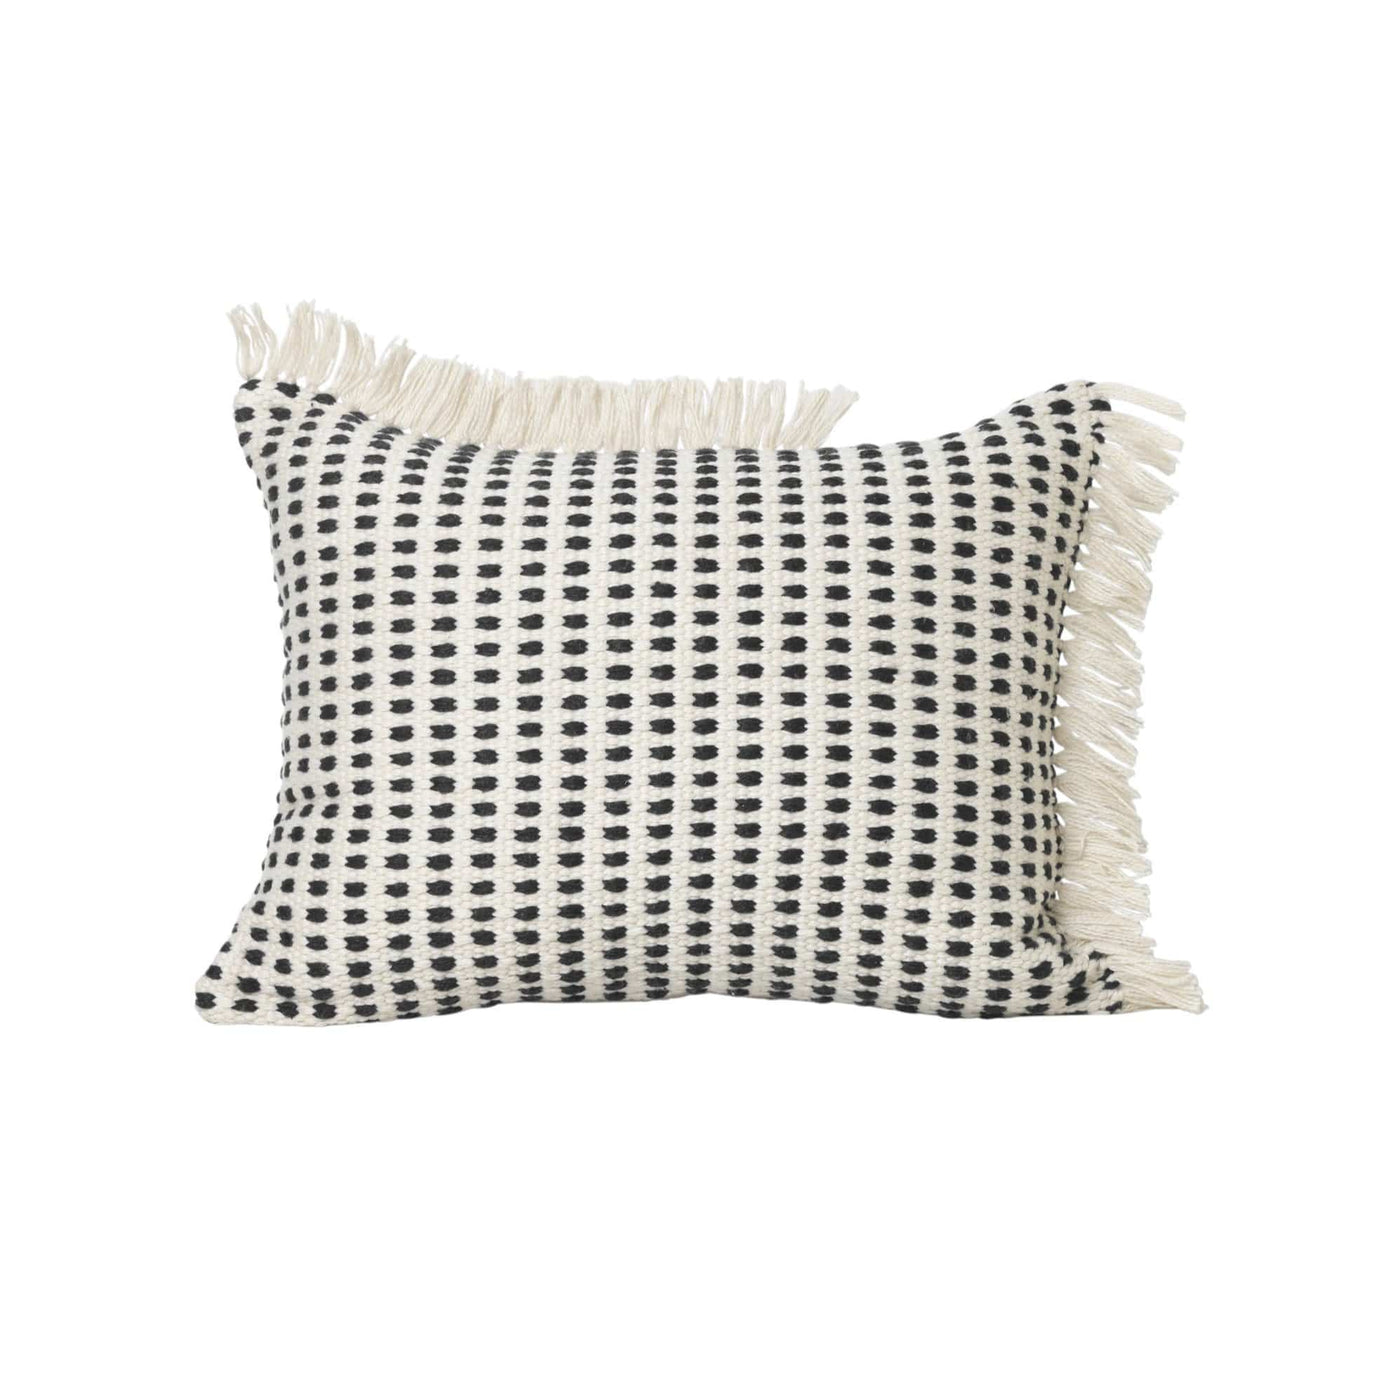 Ferm Living Way cushion made from 55 used plastic bottles. Available from someday designs